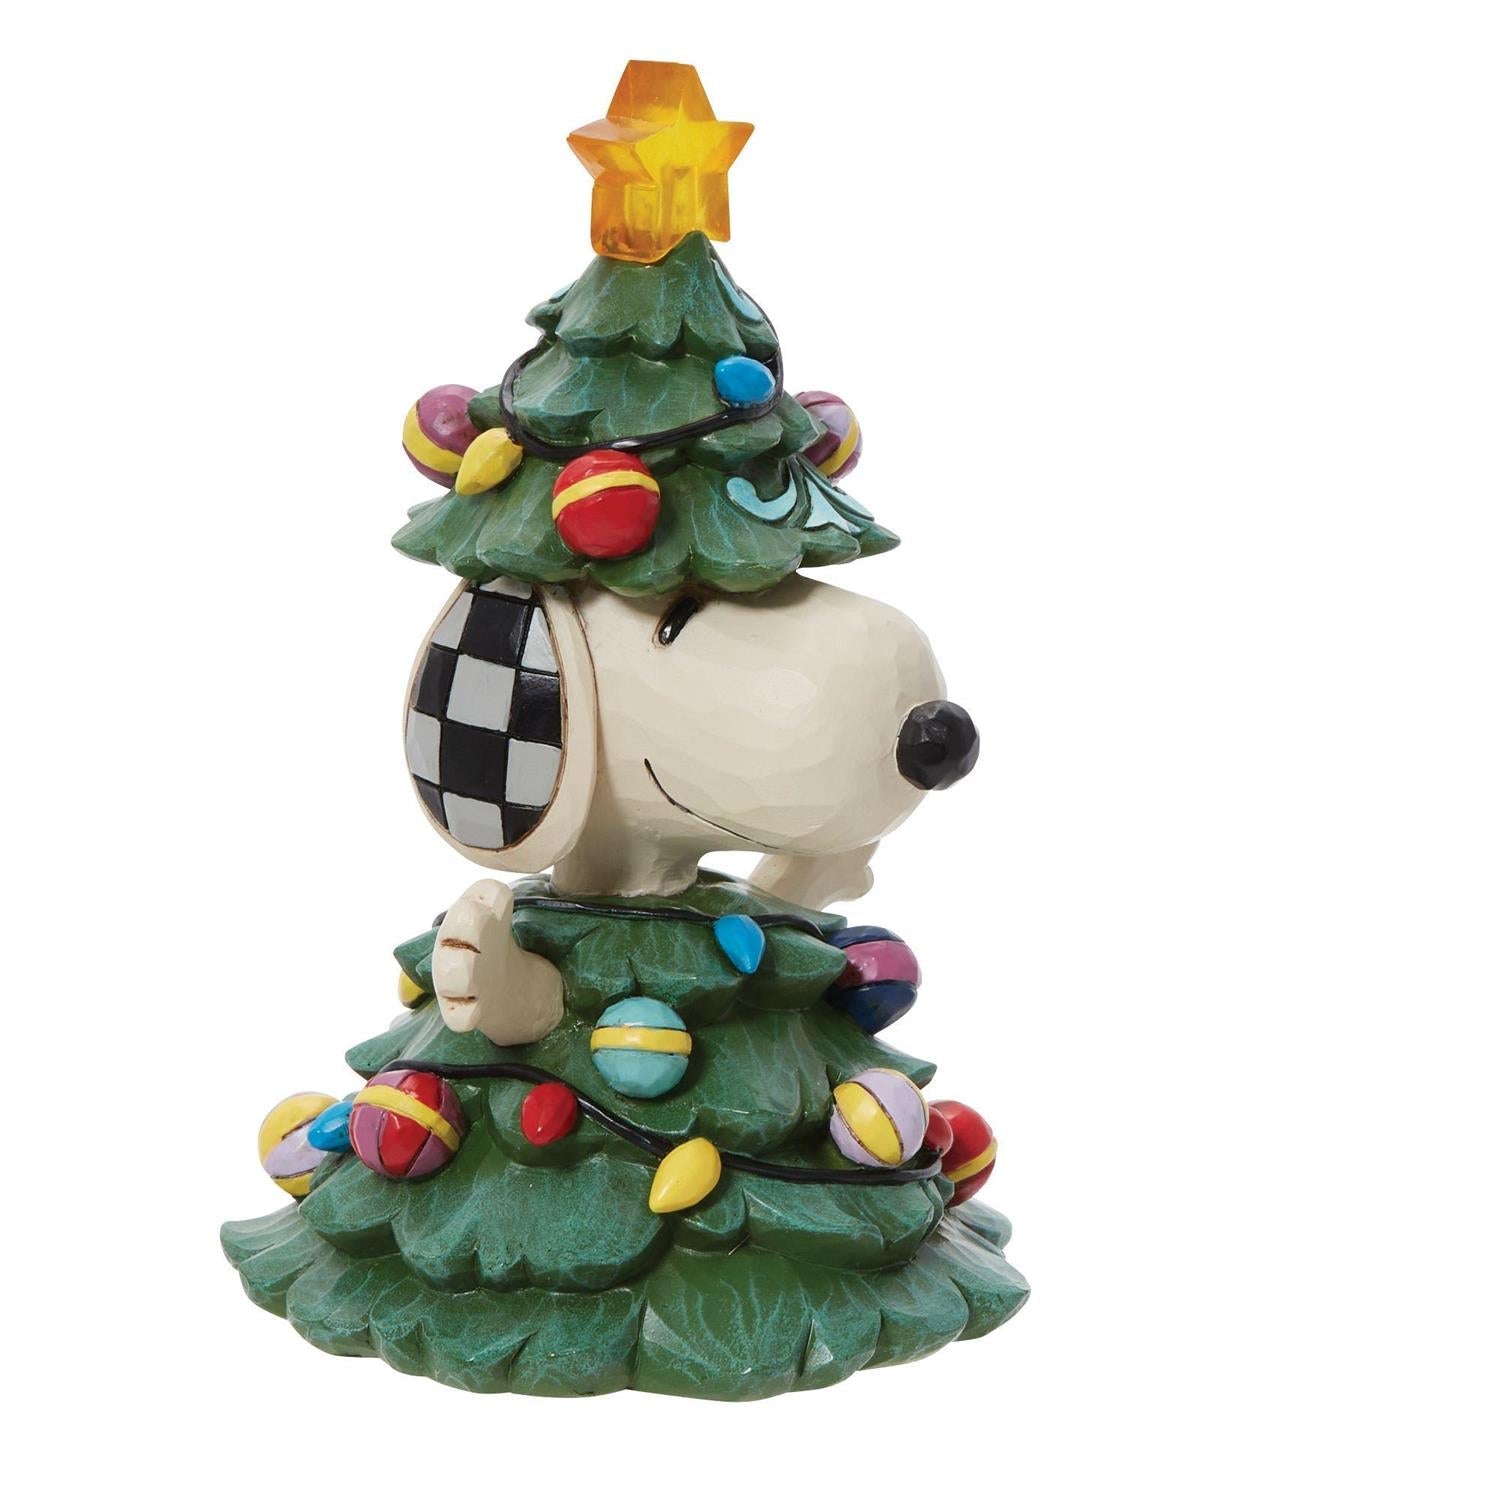 "All Lit Up!" Lights Up! Snoopy As Christmas Tree